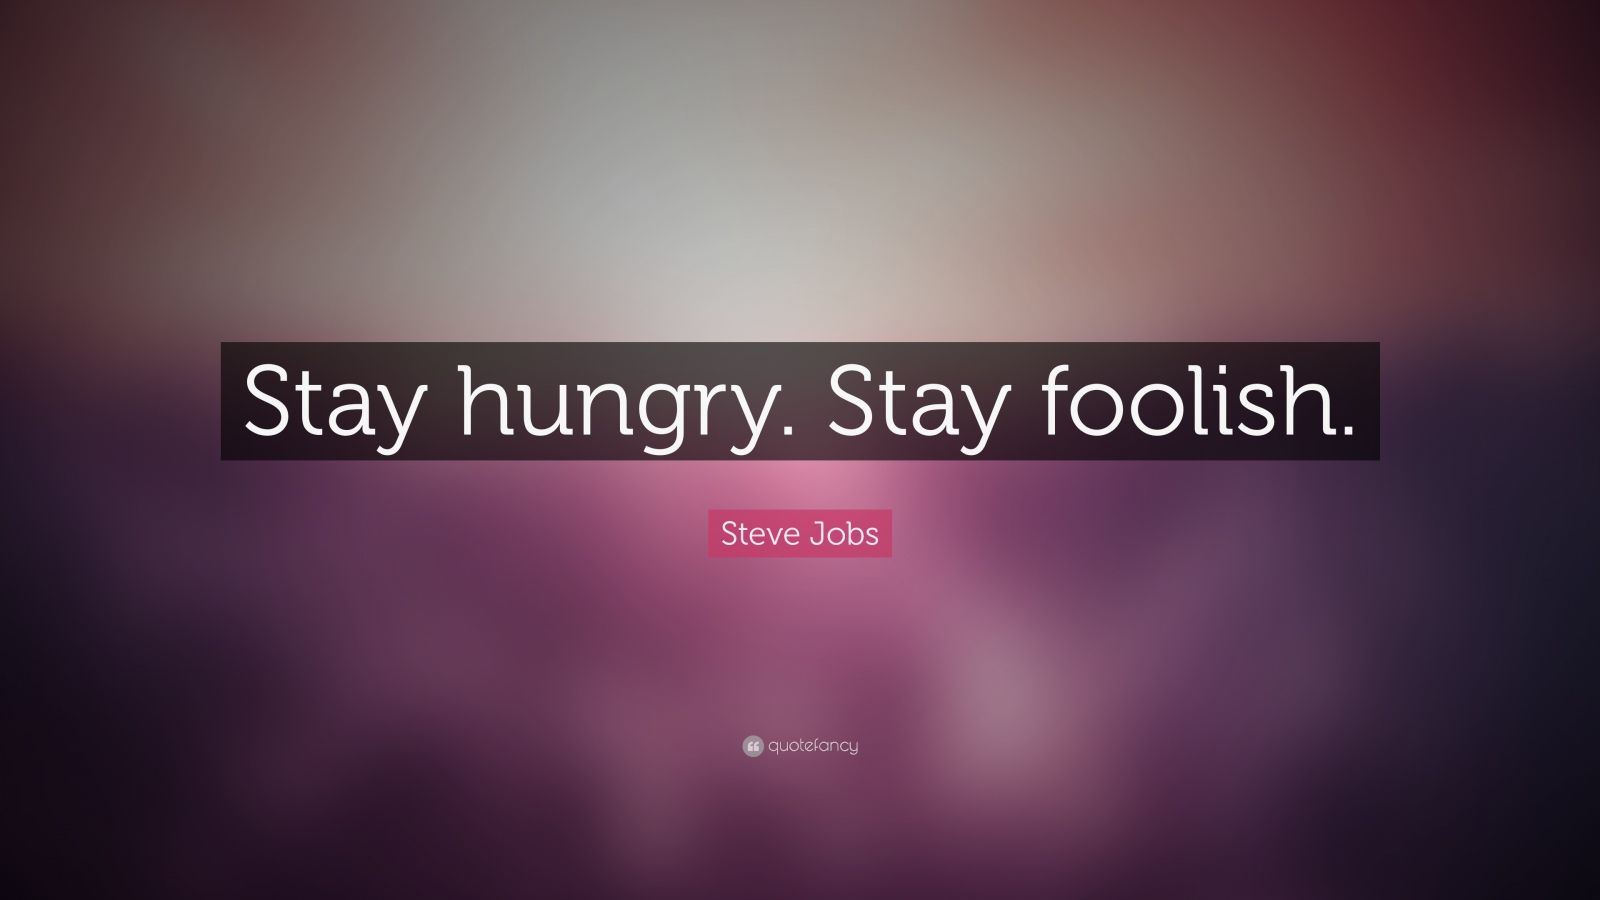 Stay Foolish Images Reverse Search